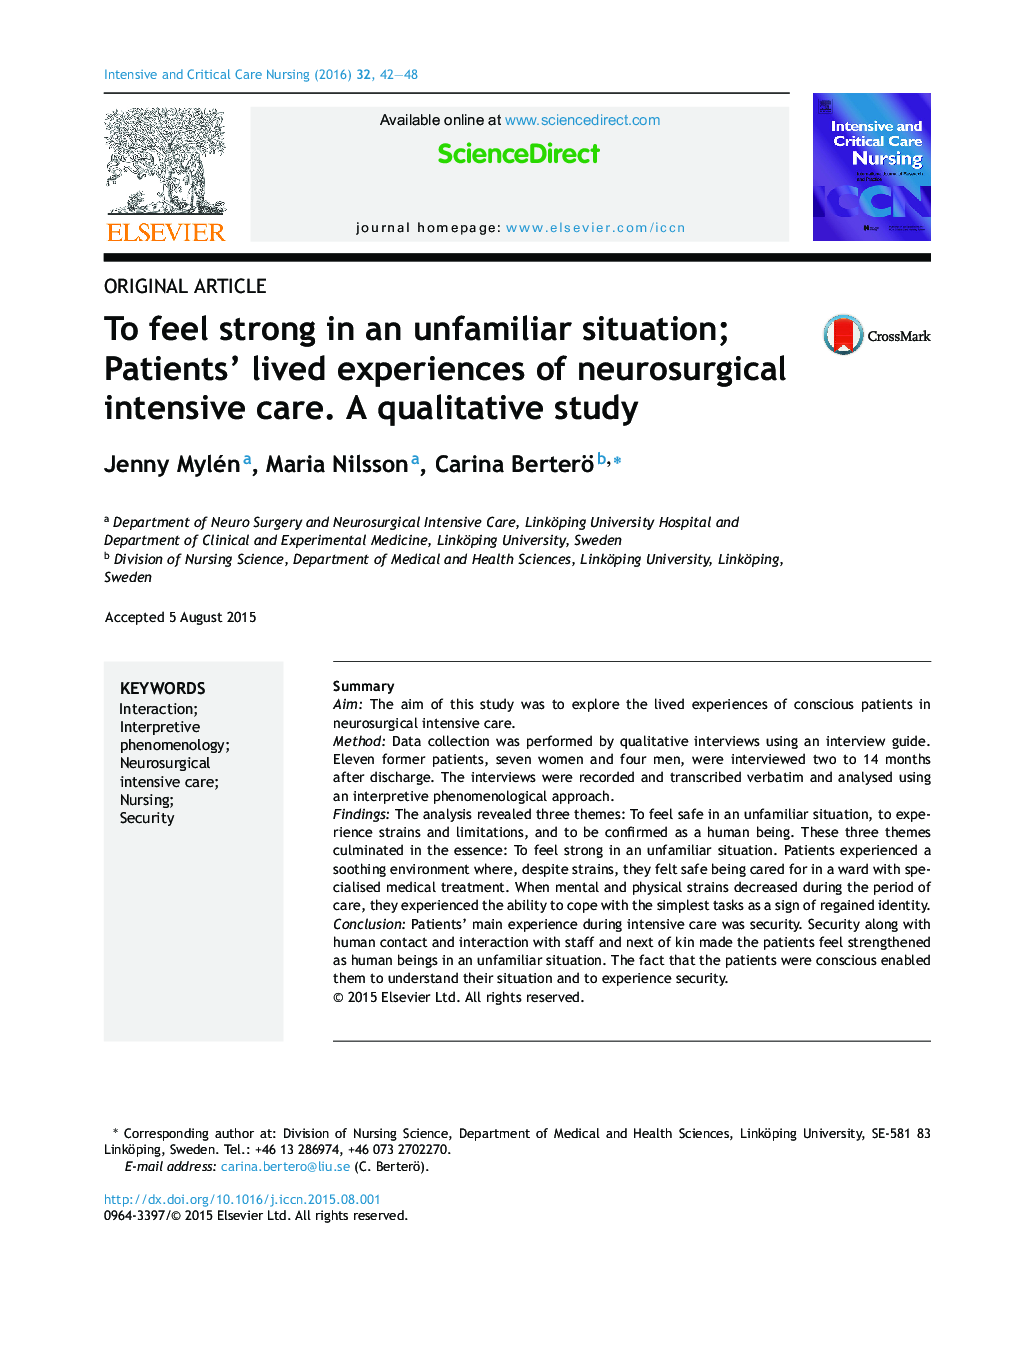 Original articleTo feel strong in an unfamiliar situation; Patients' lived experiences of neurosurgical intensive care. A qualitative study